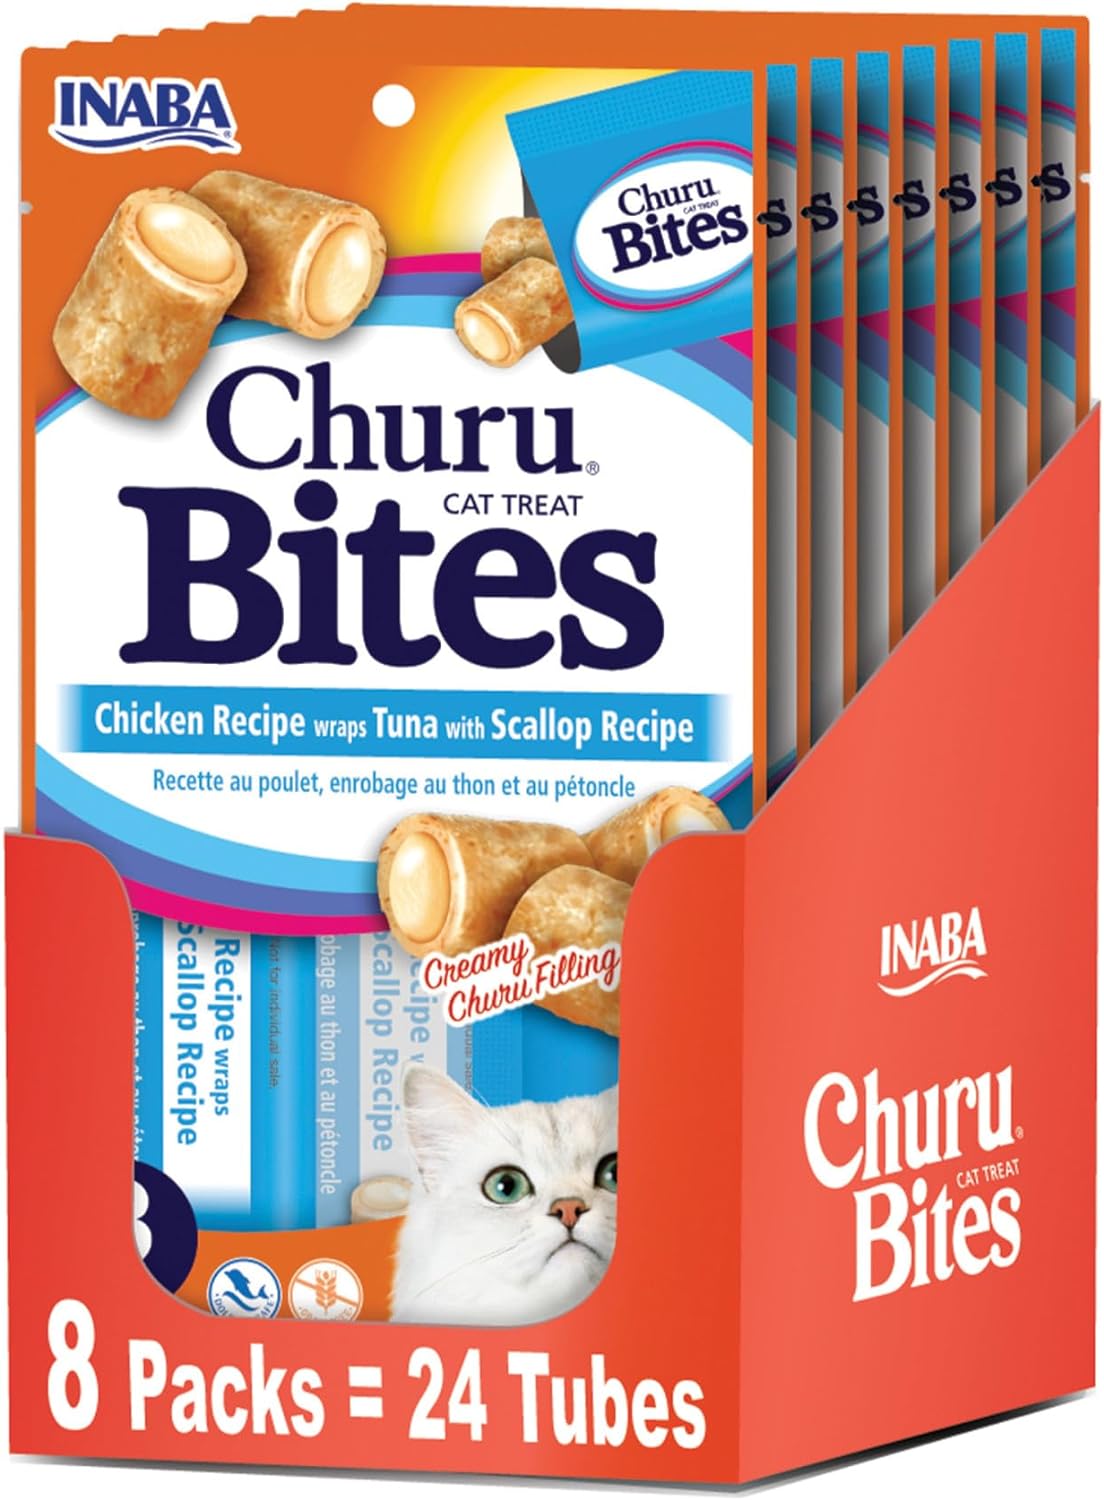 Inaba Churu Bites for Cats, Soft Baked Chicken Churu Filled Cat Treats with Vitamin E, 0.35 Ounces Each Tube, 24 Tubes Total (3 Per Pack), Tuna with Scallop Recipe